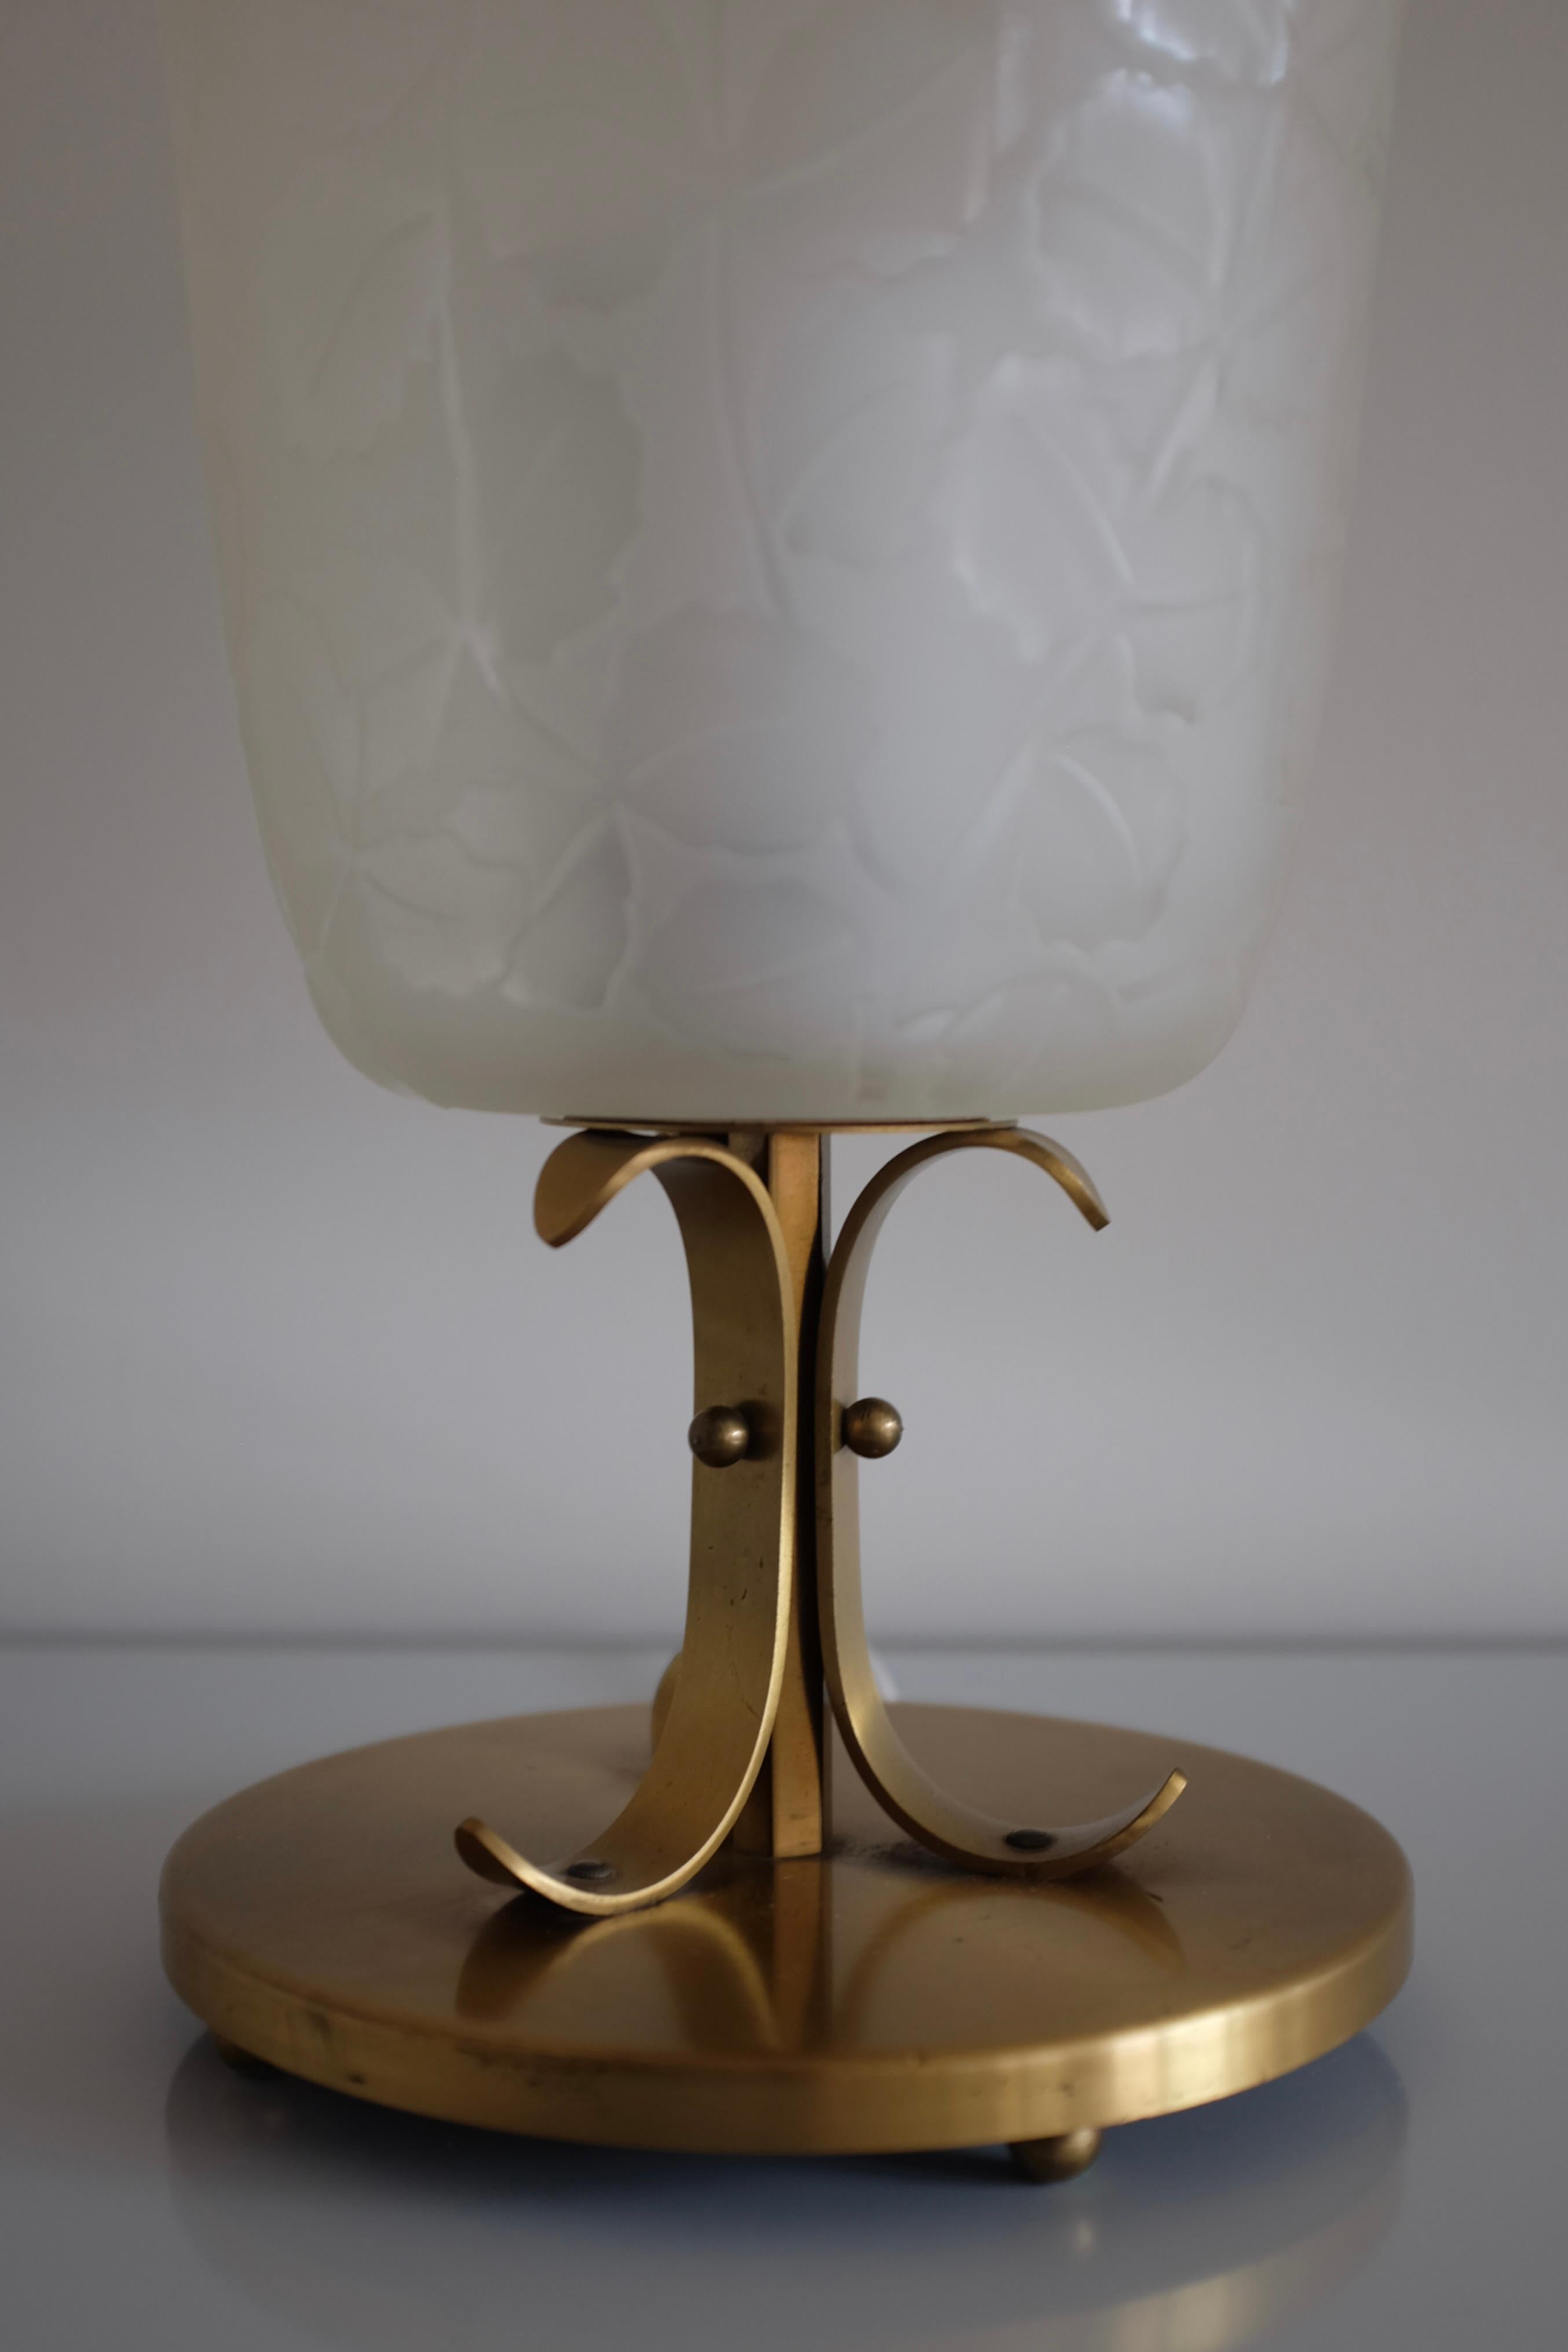 Rare 1940s Table lamp by Glössner & Co., Sweden. Beautifully engraved leaves covers the glas lantern standing on a brass lamp fot with decorative curved ornaments. Glössner & Co was a Swedish lamp manufacturer during the mid 20th century known for